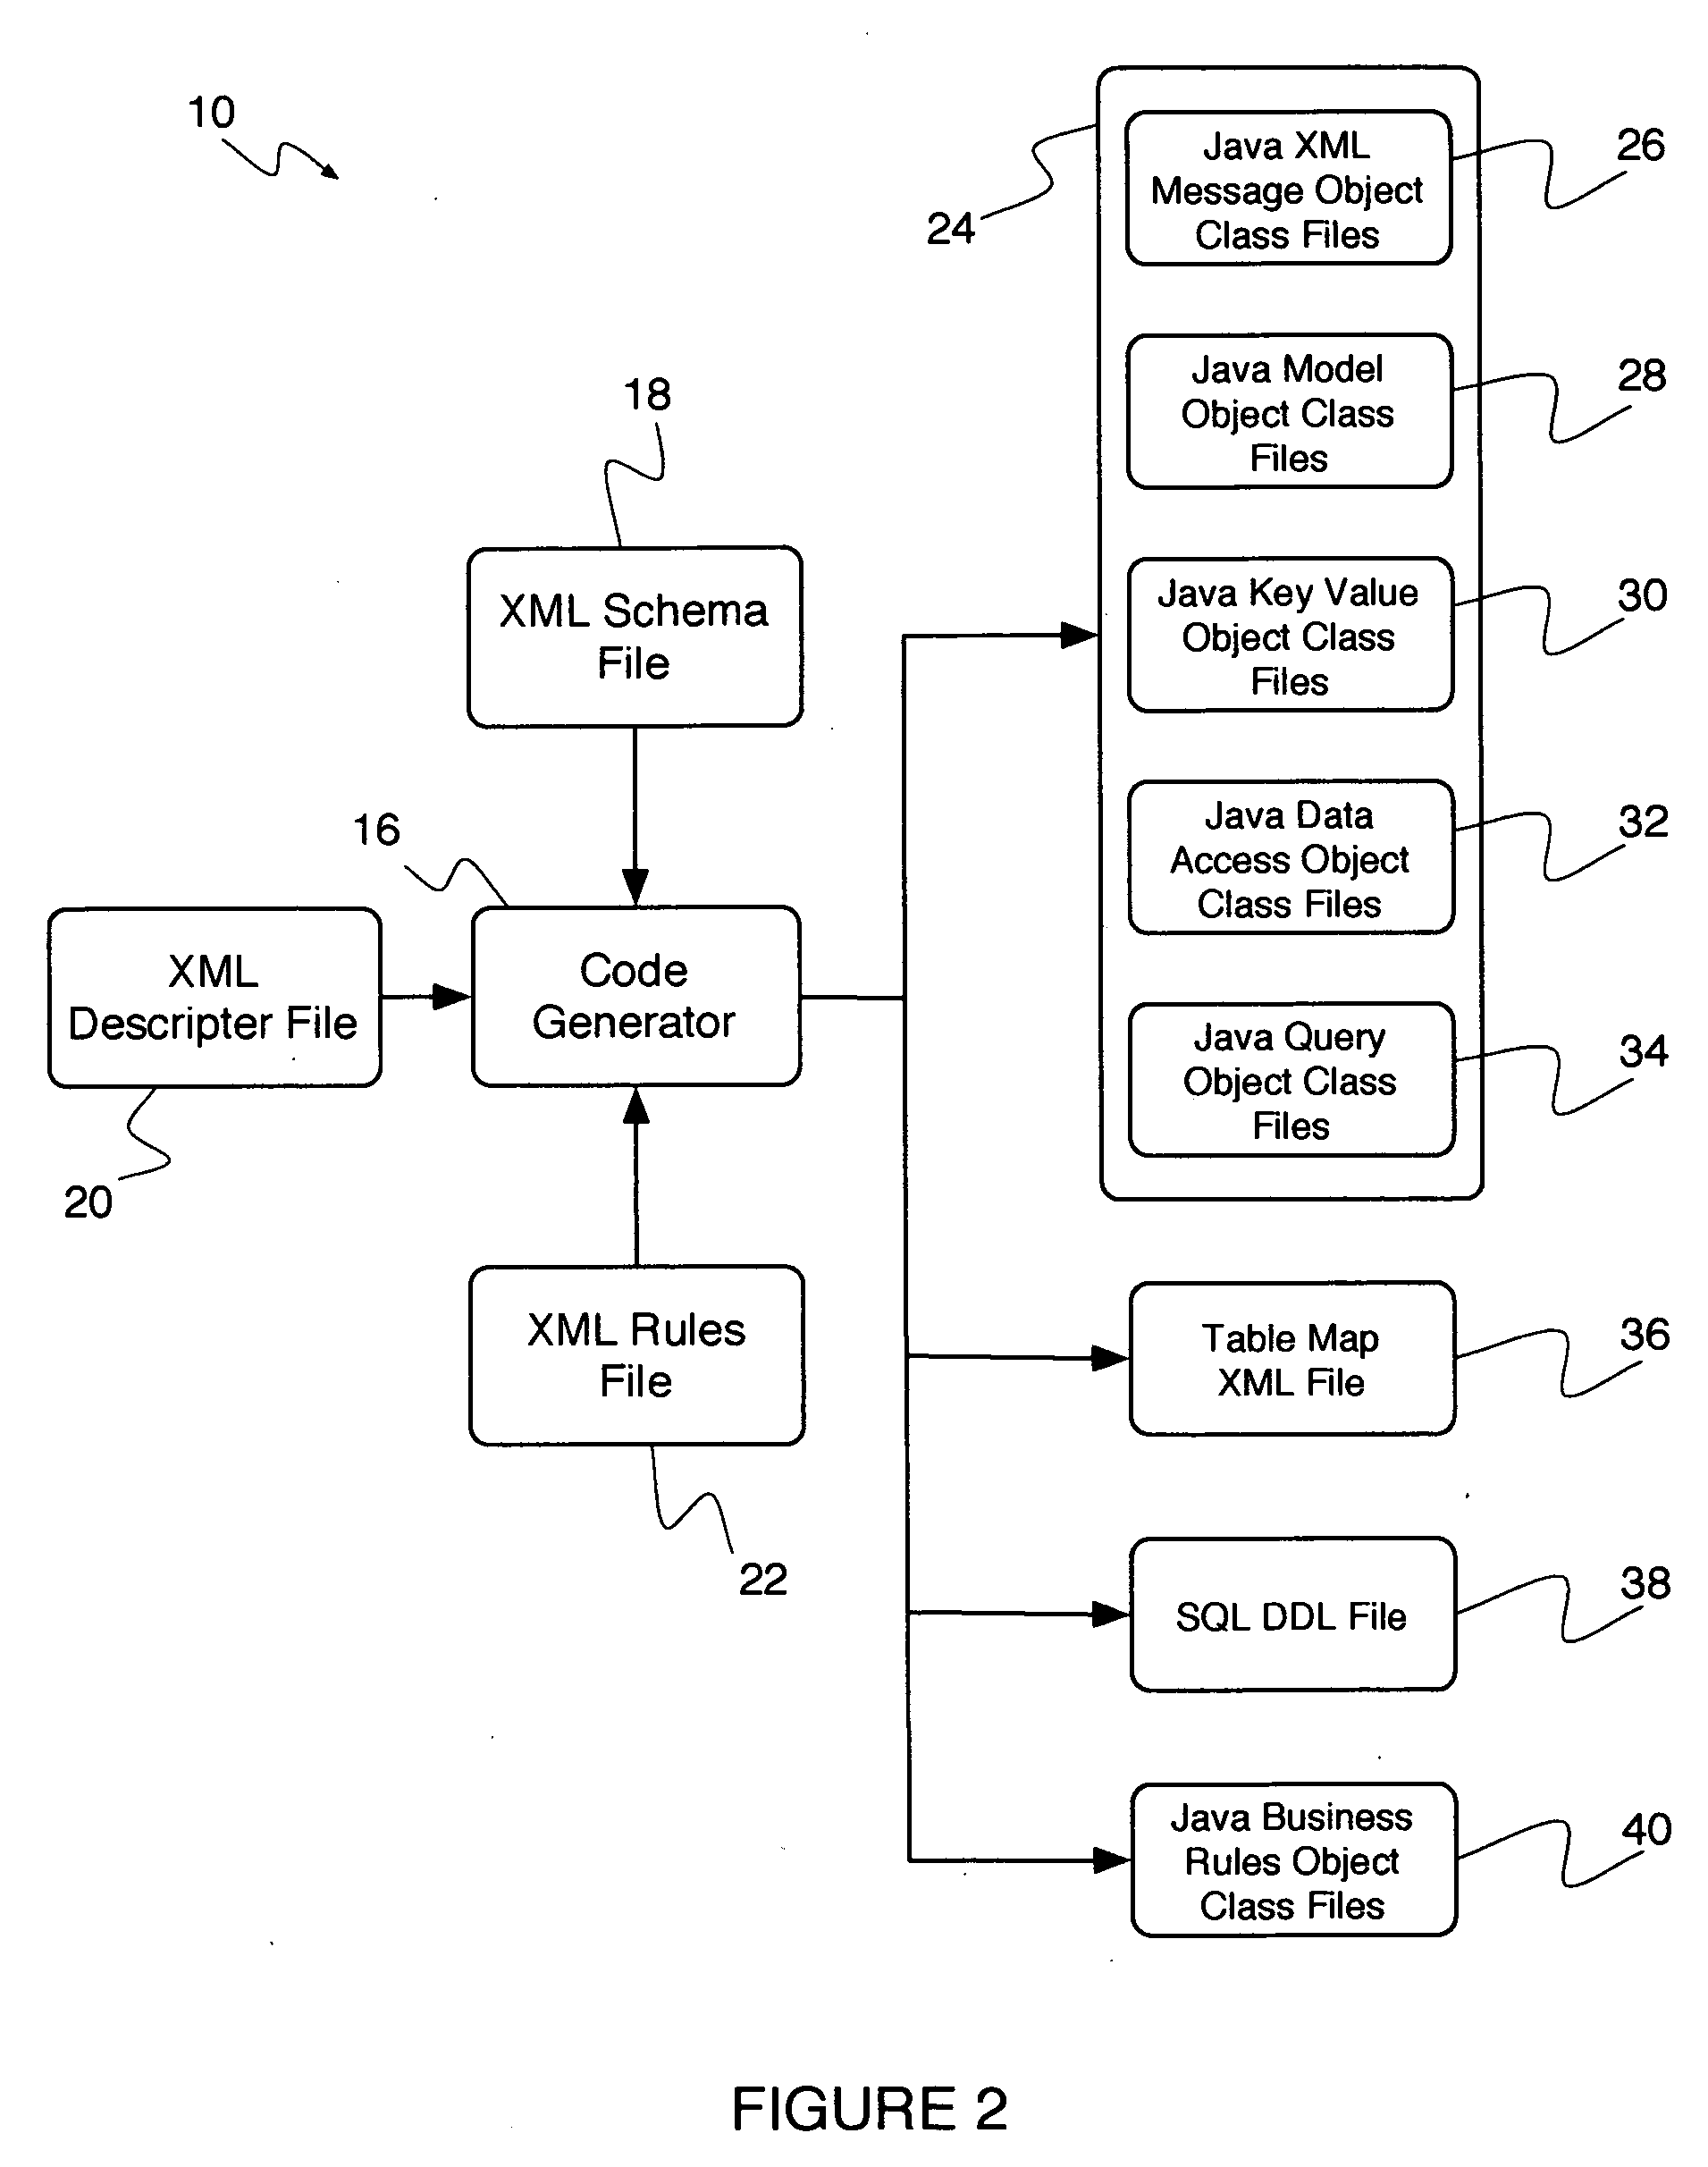 System and method for automating the development of web services that incorporate business rules